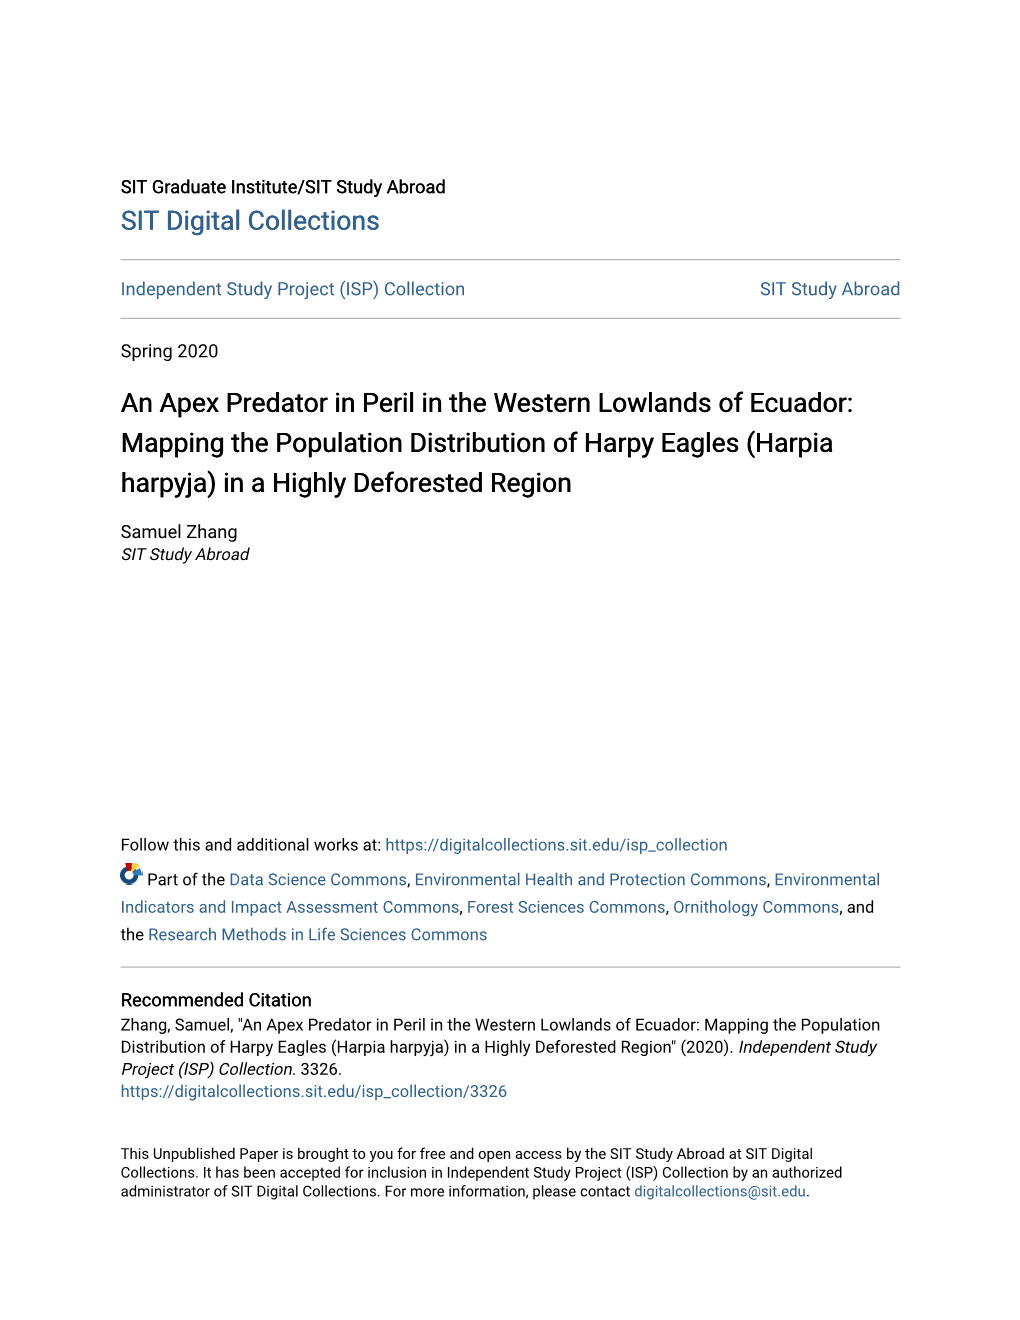 An Apex Predator in Peril in the Western Lowlands of Ecuador: Mapping the Population Distribution of Harpy Eagles (Harpia Harpyja) in a Highly Deforested Region